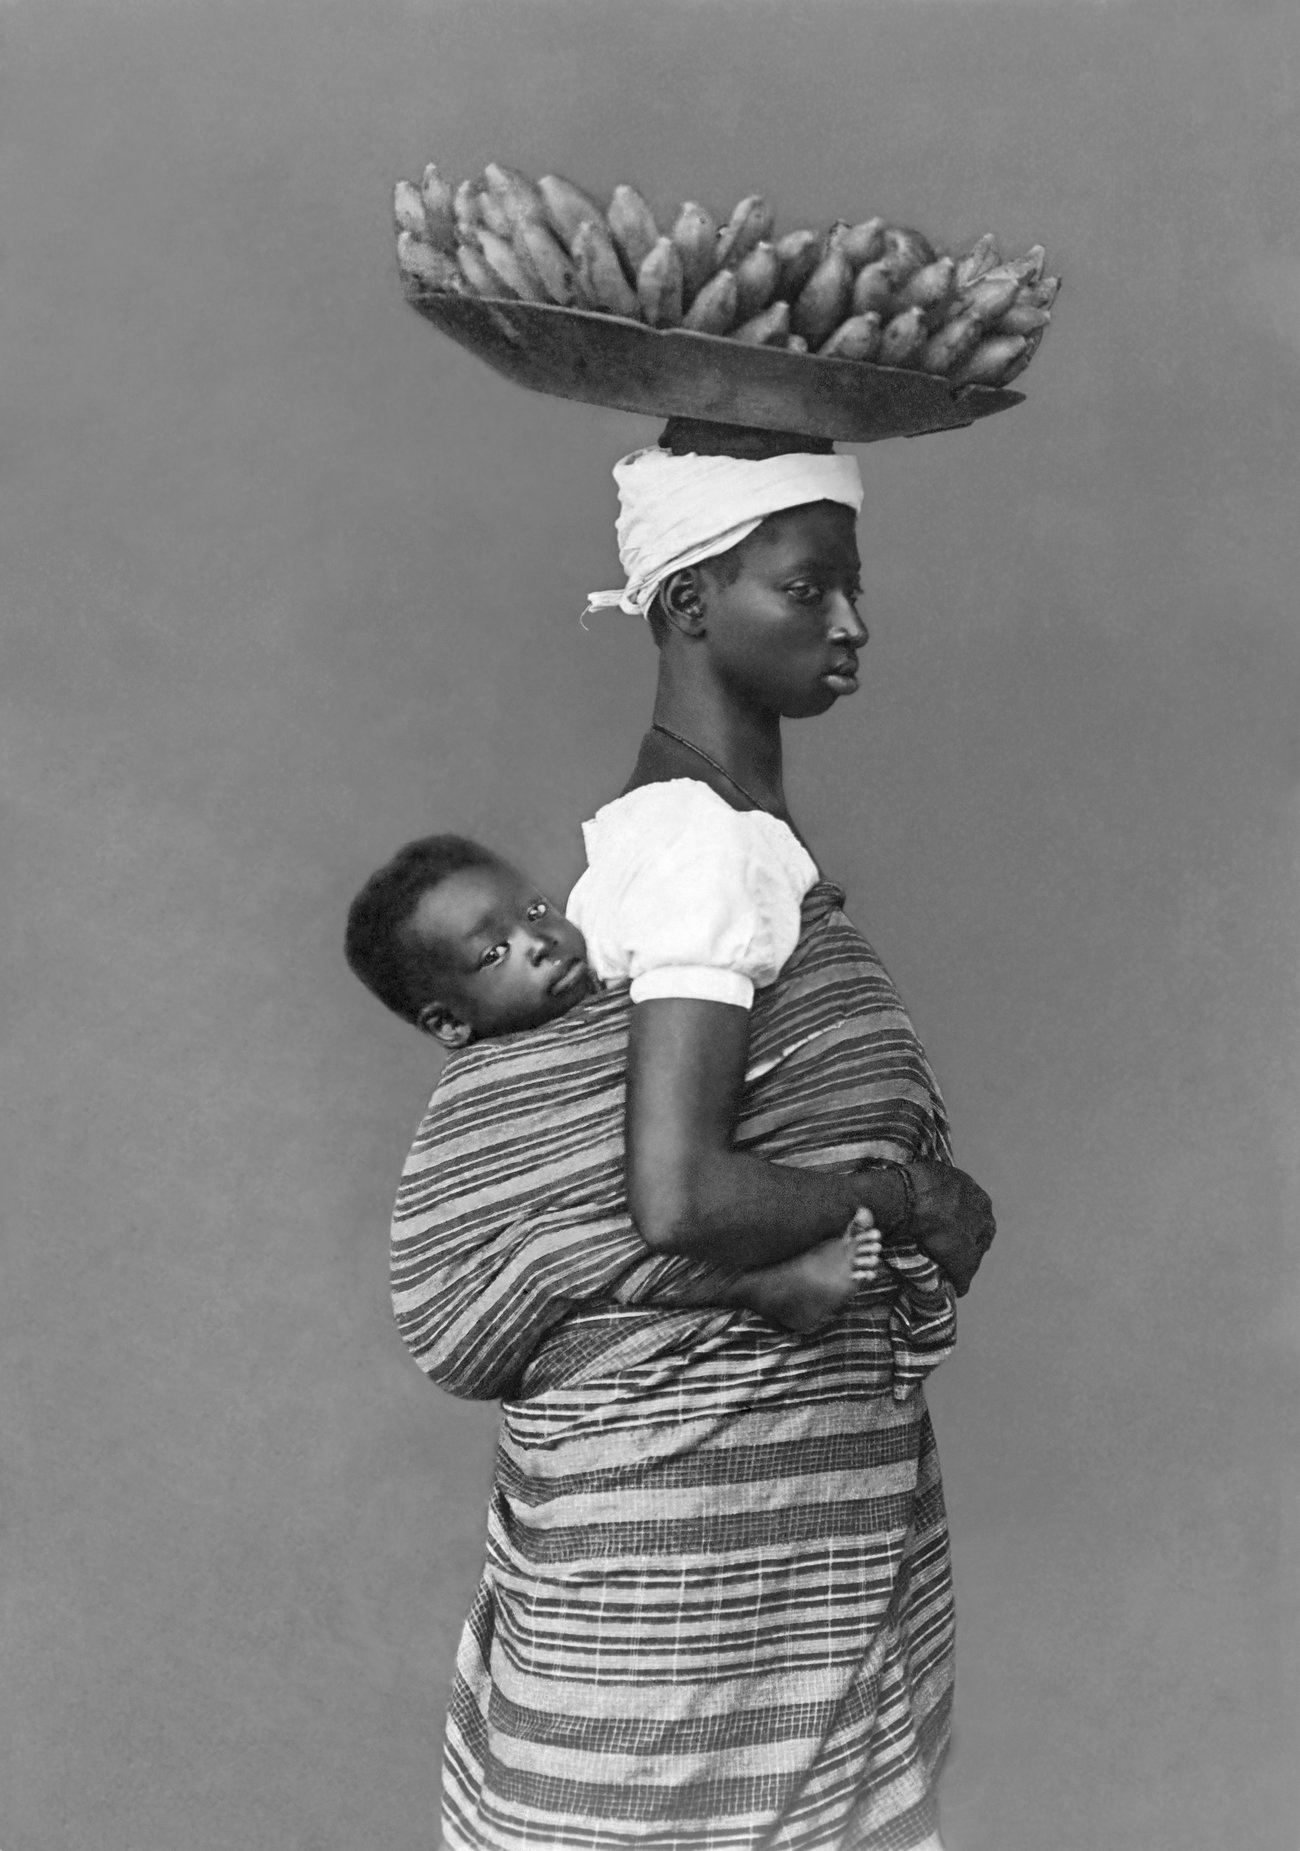 A slave with her child, photographed in 1884, Salvador de Bahia.